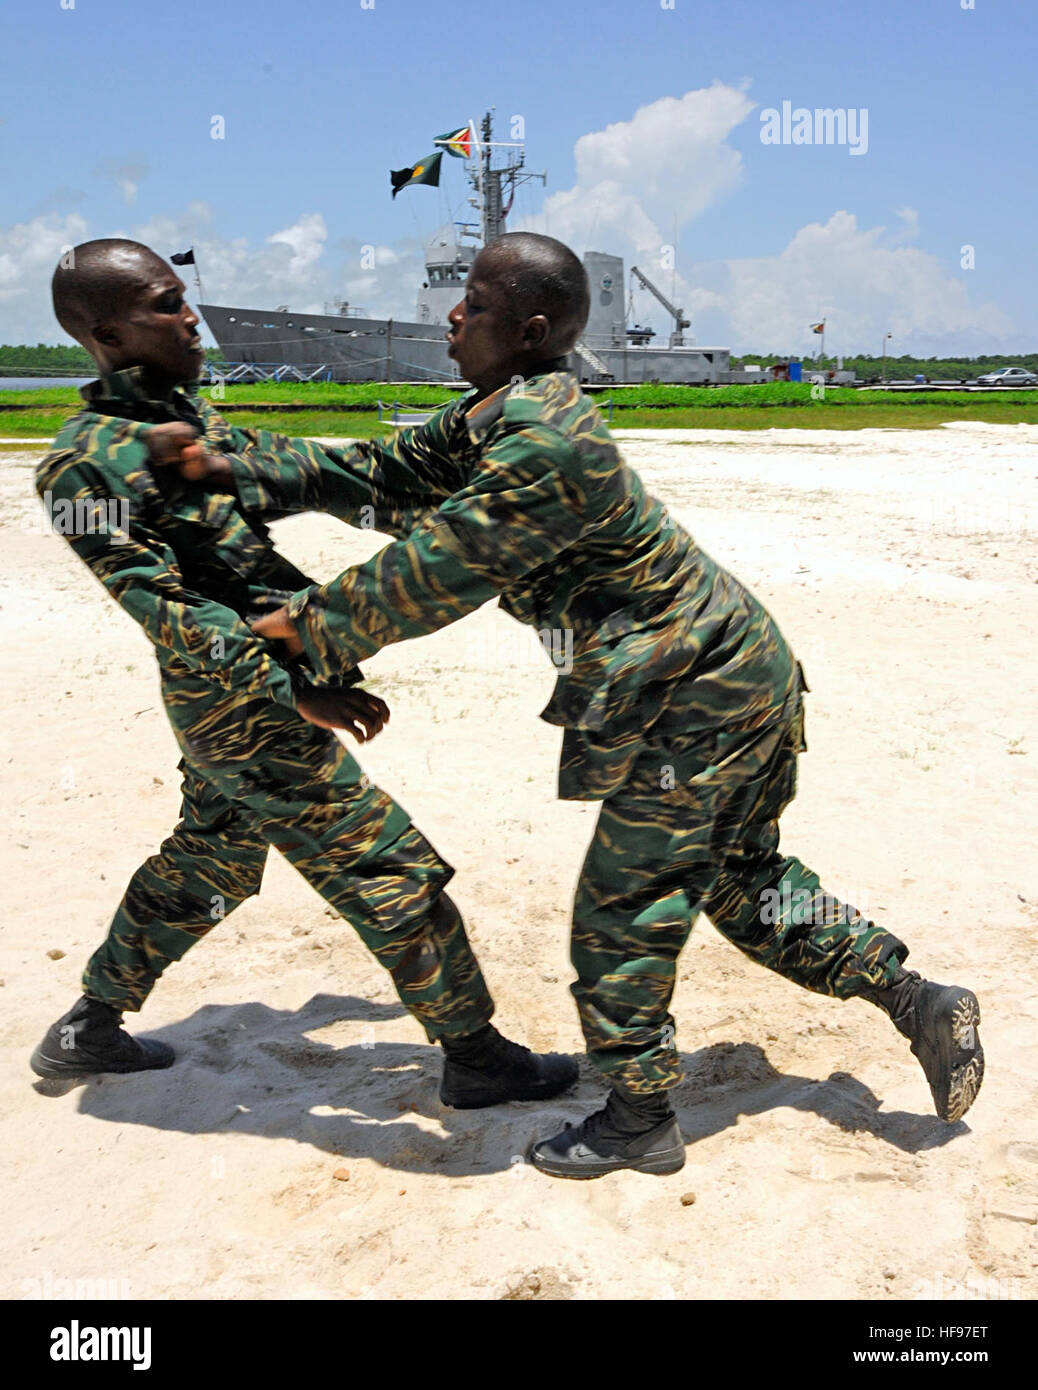 Guyanese coast guard sailors demonstrate a takedown drill during a Marine Corps Martial Arts Program (MCMAP) tan belt test in Georgetown, Guyana, Sept. 3, 2010. U.S. Marines embarked aboard high-speed vessel Swift (HSV-2) are facilitating the MCMAP session in support of Southern Partnership Station (SPS) 2010. SPS is designed to promote information-sharing with navies, coast guards and civilian services throughout the U.S. Southern Command area of responsibility. (DoD photo by Mass Communication Specialist 1st Class Kim Williams, U.S. Navy/Released) 100903-N-9643W-0778 (4967542361) Stock Photo